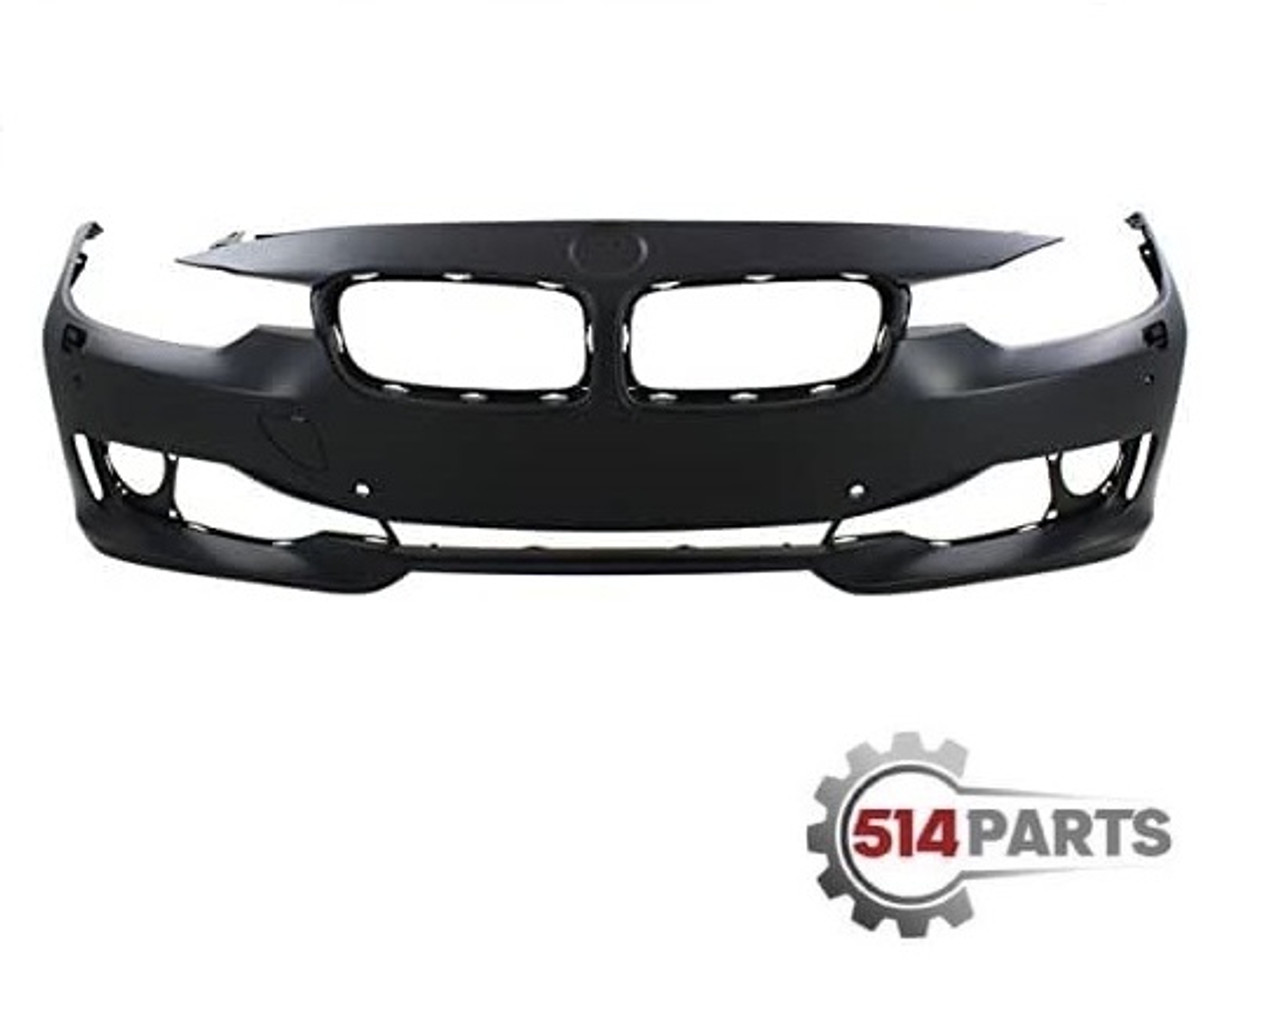 2012 - 2015 BMW 3 SERIES SEDAN/WAGON FRONT BUMPER WITH SENSOR WITH HEAD LIGHTS WASHER WITH CAMERA WITH PARK DISTANCE CONTROL NO MOLDING - PARE-CHOCS AVANT AVEC SENSOR AVEC LAVE PHARES AVEC CAMERA AVEC PARK DISTANCE CONTROL NO MOLDING